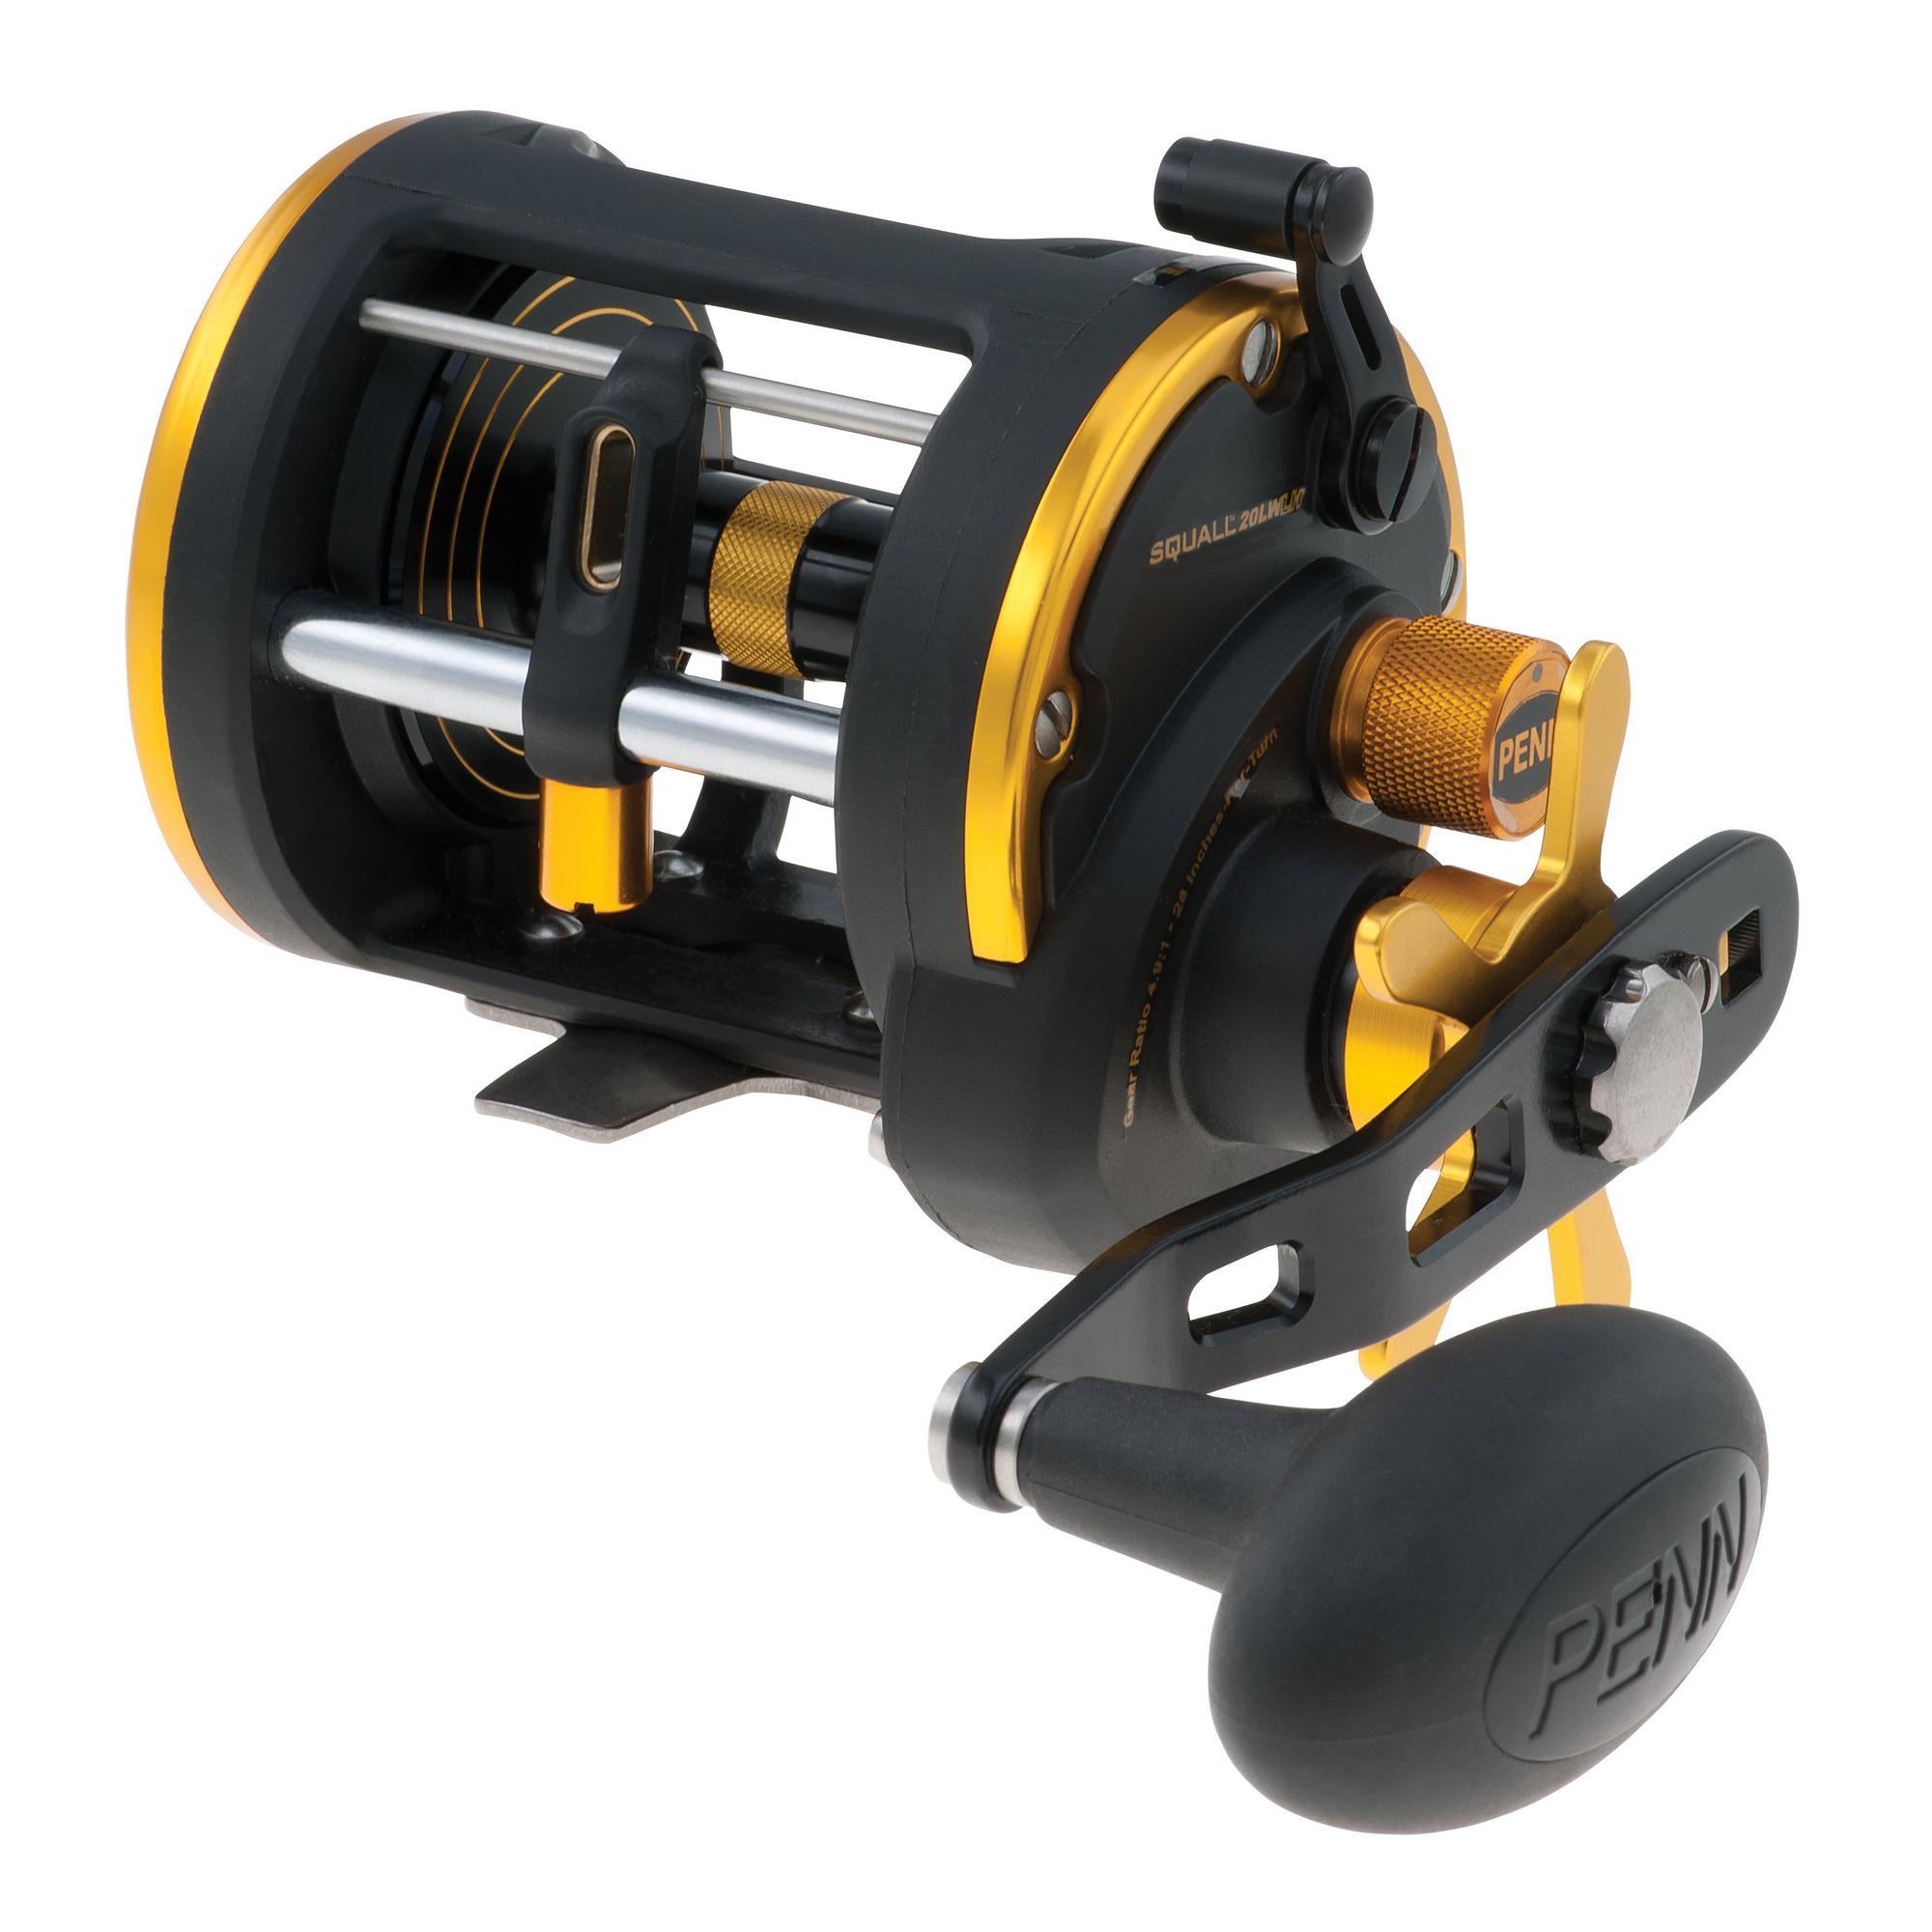 Penn Squall 20 LW Left Hand Levelwind Reel - Buy from NZ owned businesses -  Over 500,000 products available 